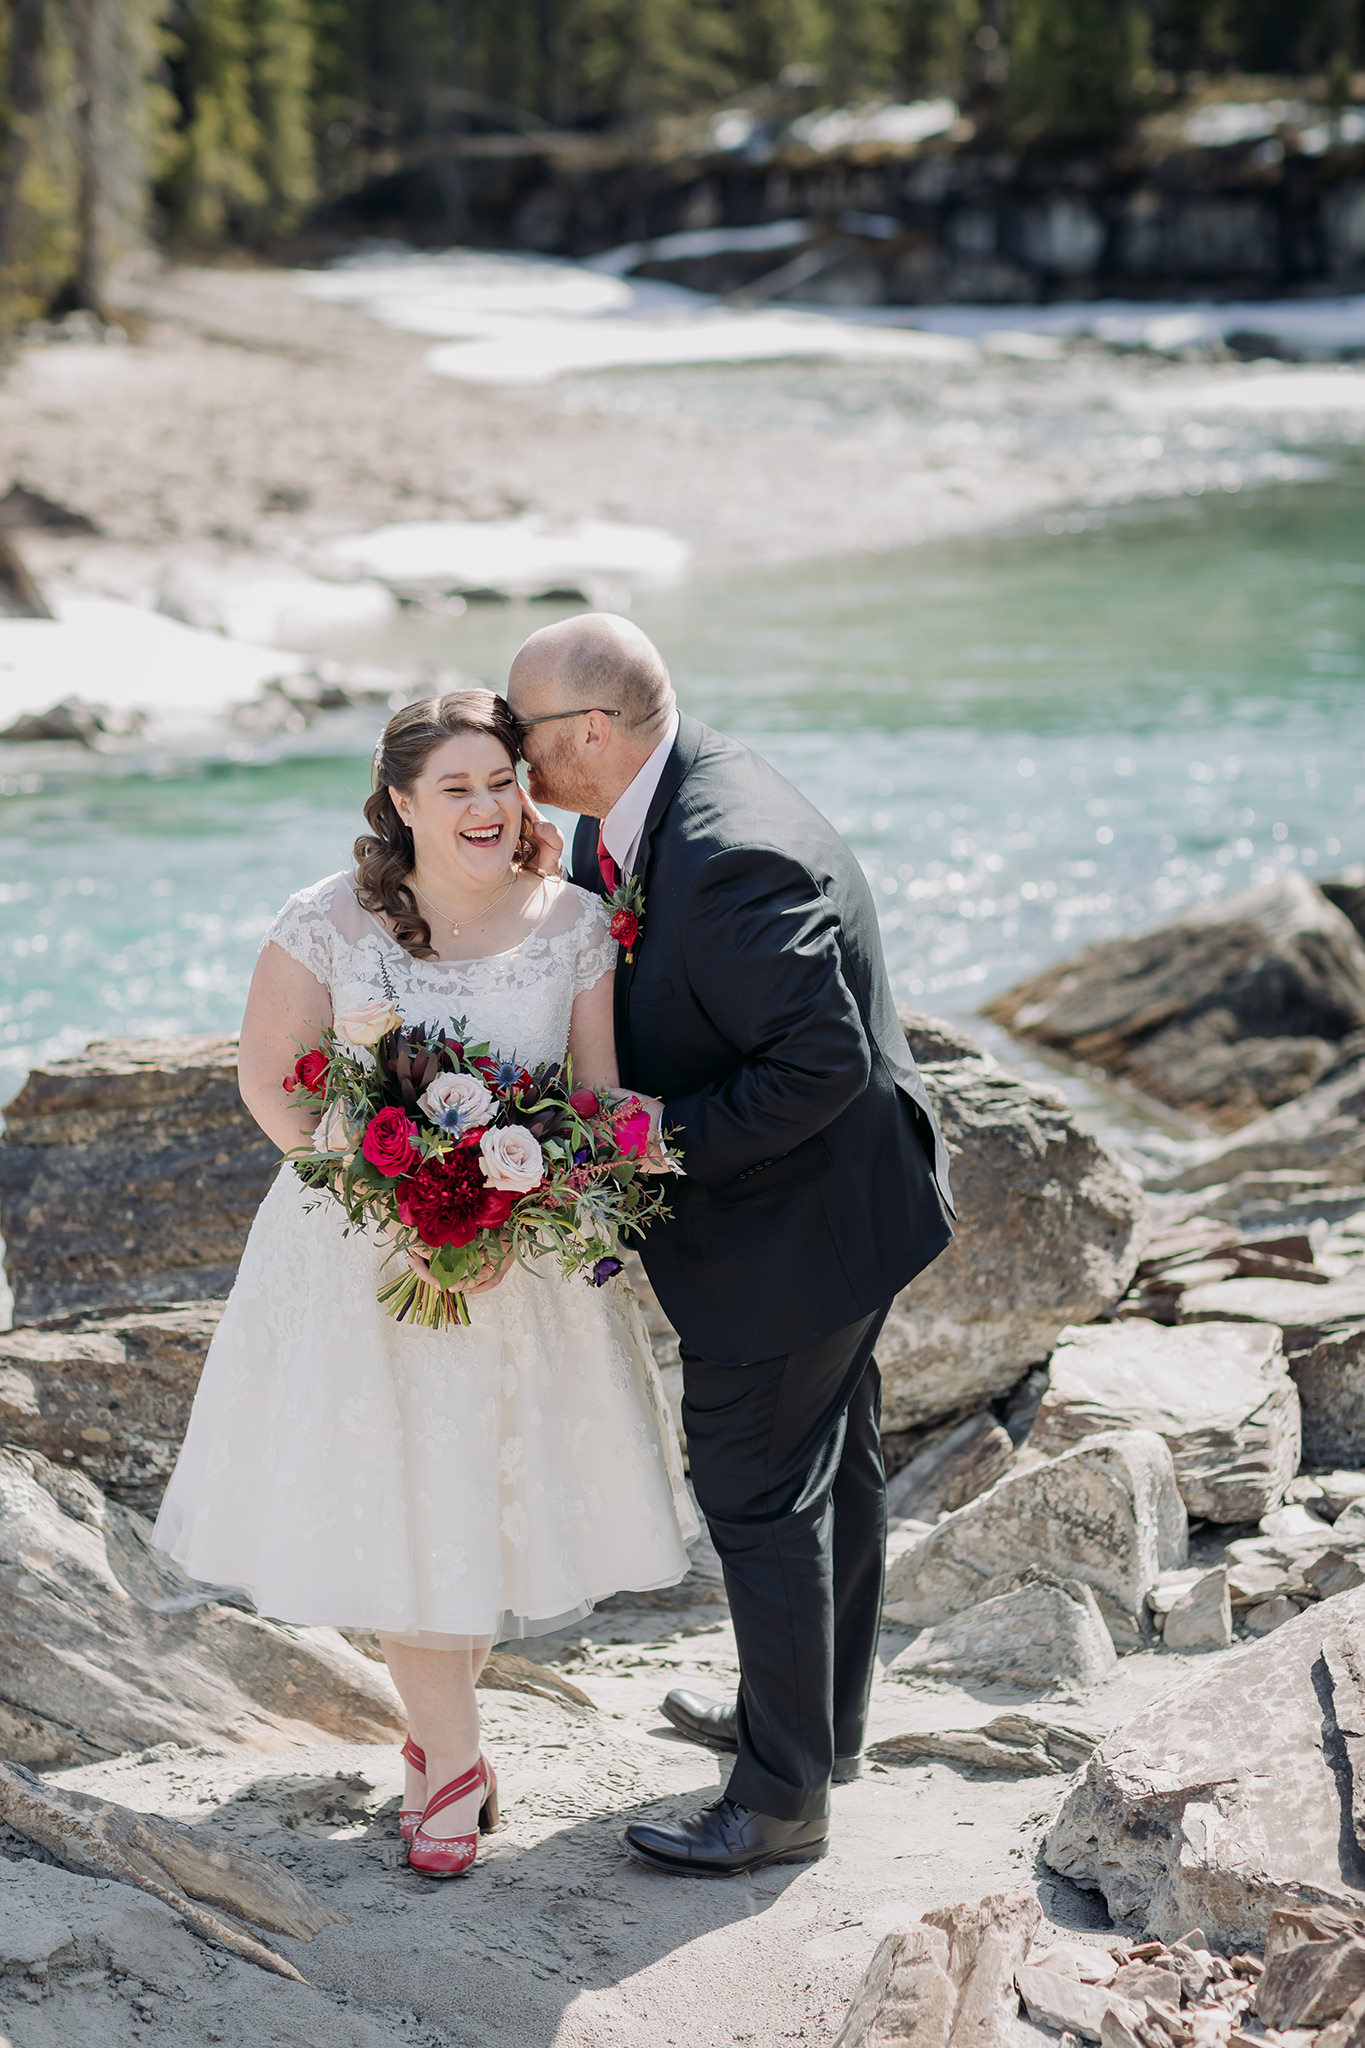 Emerald Lake Lodge intimate bride & groom portraits at the nearby Natural Bridge in Yoho National Park in late April